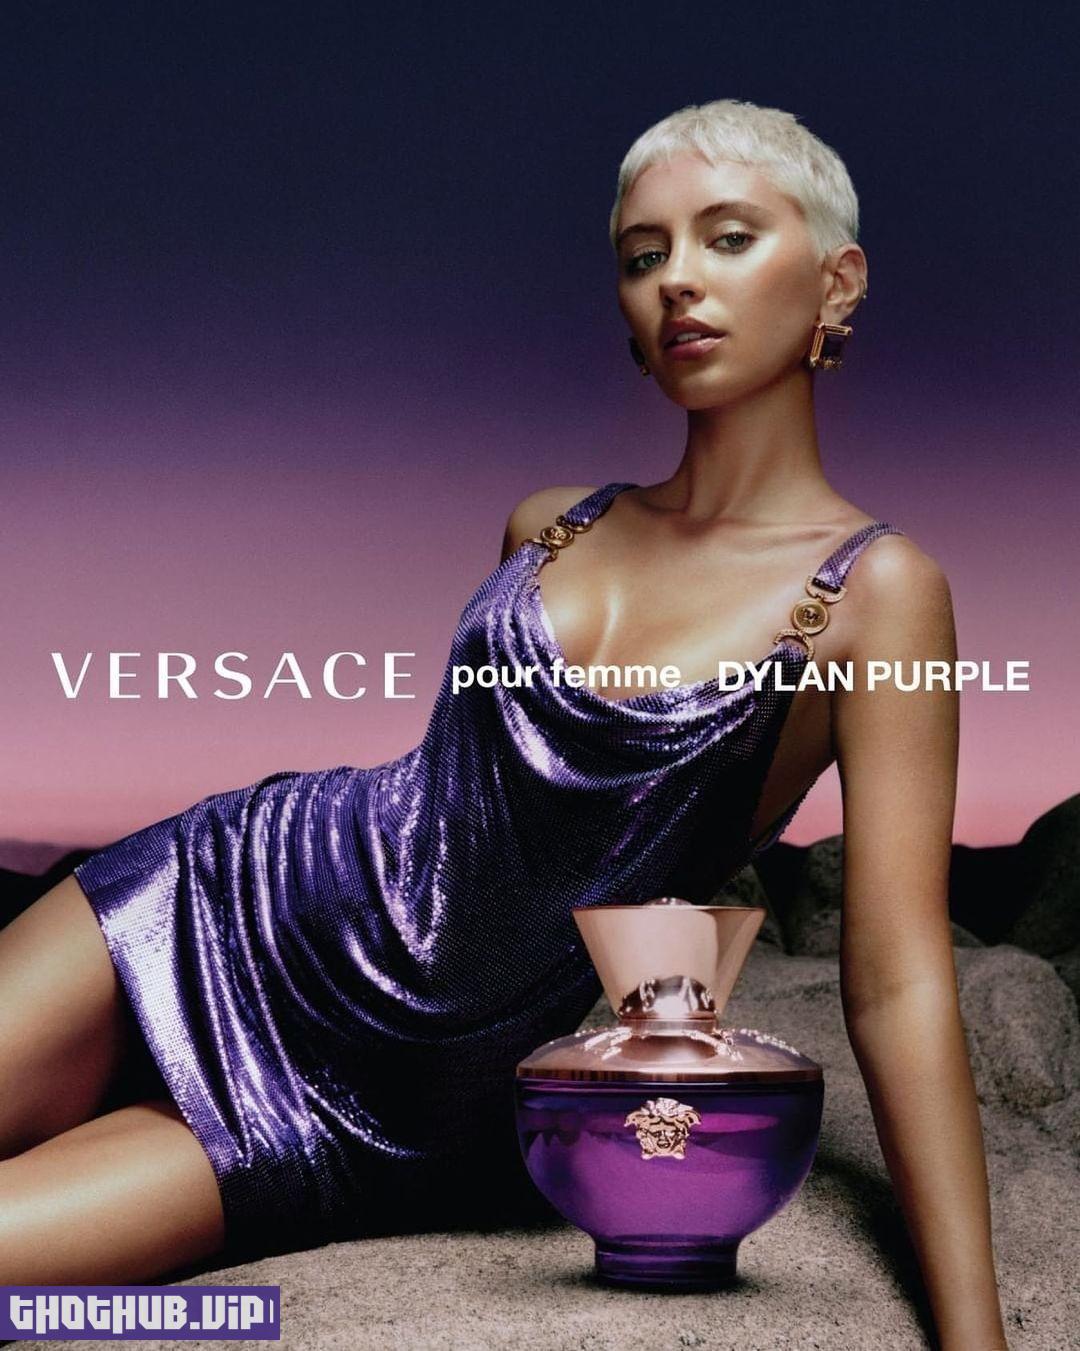 Iris Law Commercial Shoot For Versace Dylan Purple 5 Photos